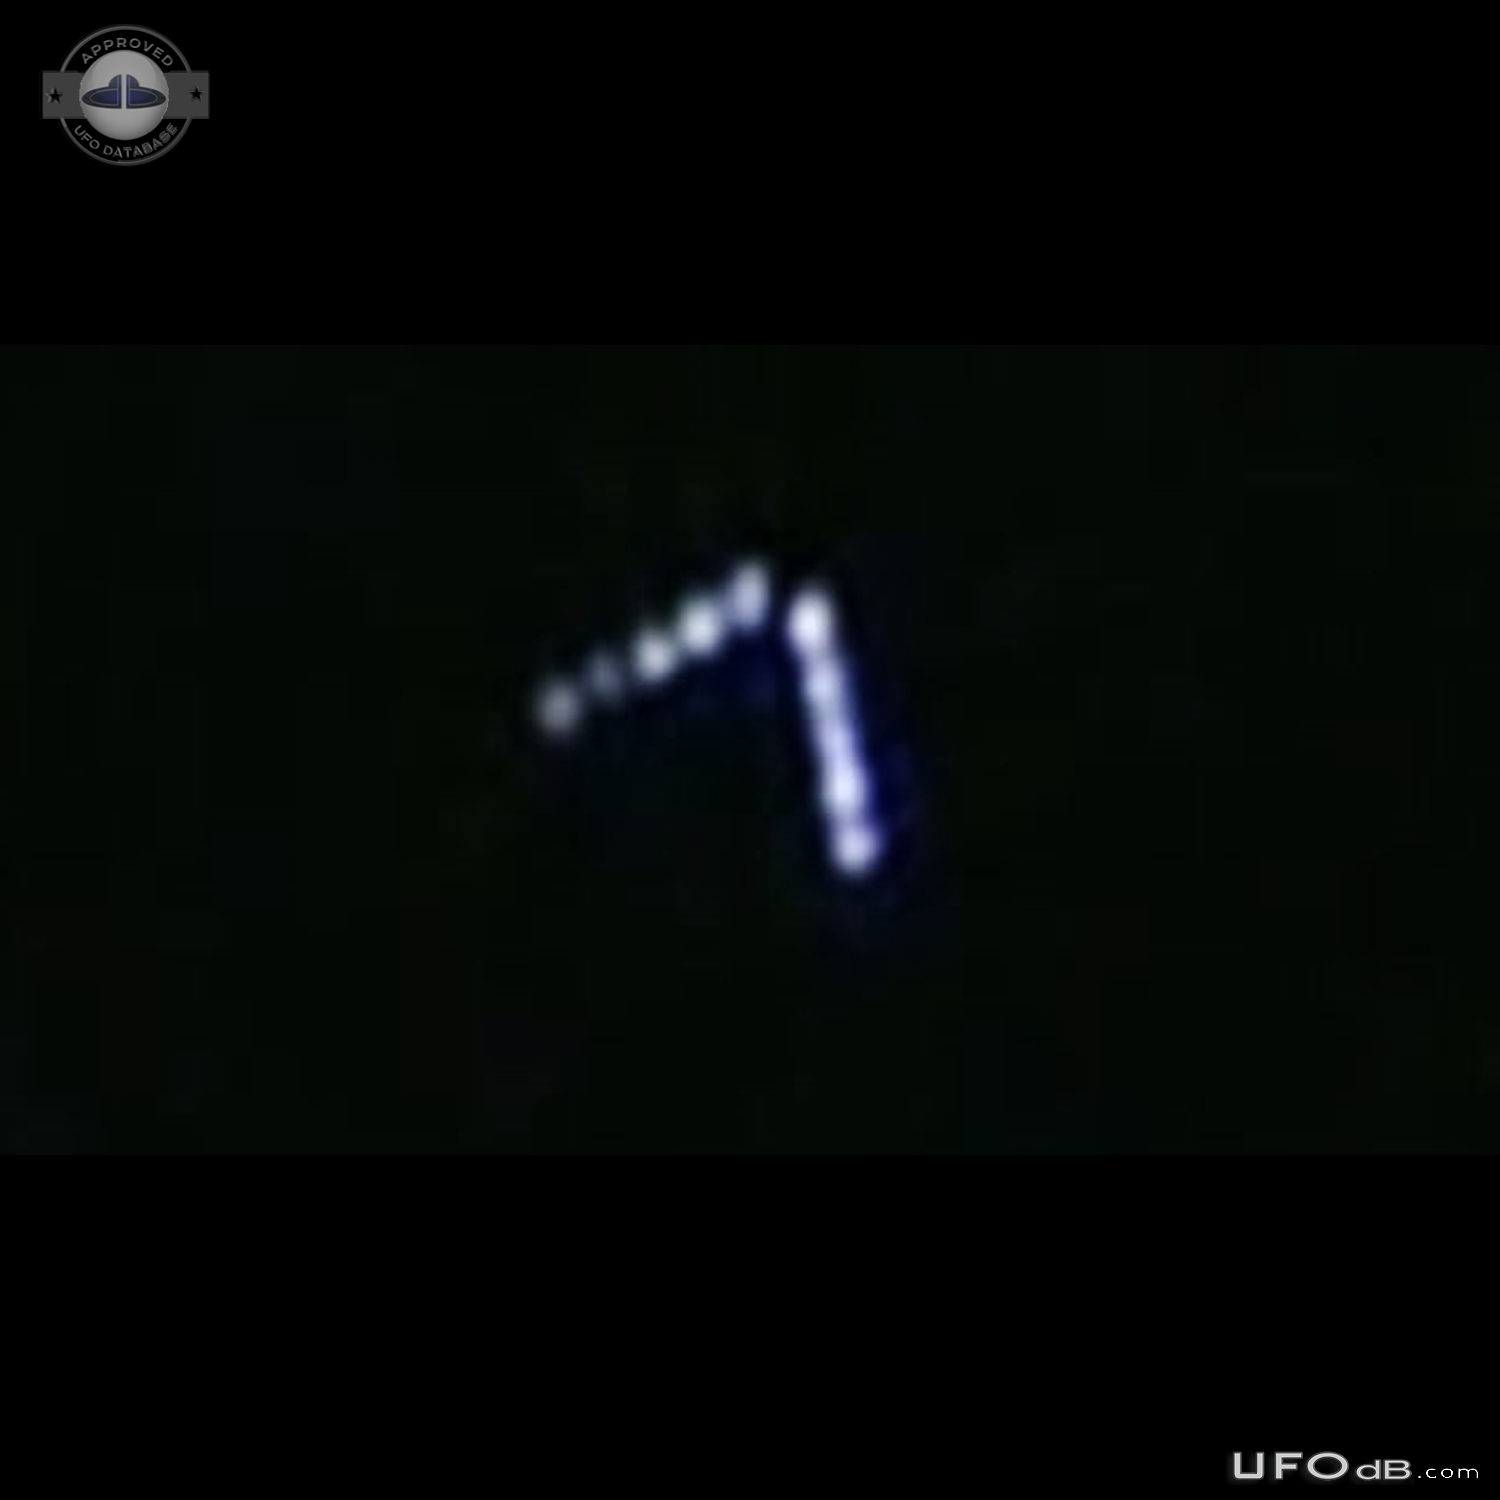 V-Shaped Silent Flying UFO Seen through thin clouds - Lehigh Acres Flo UFO Picture #735-2